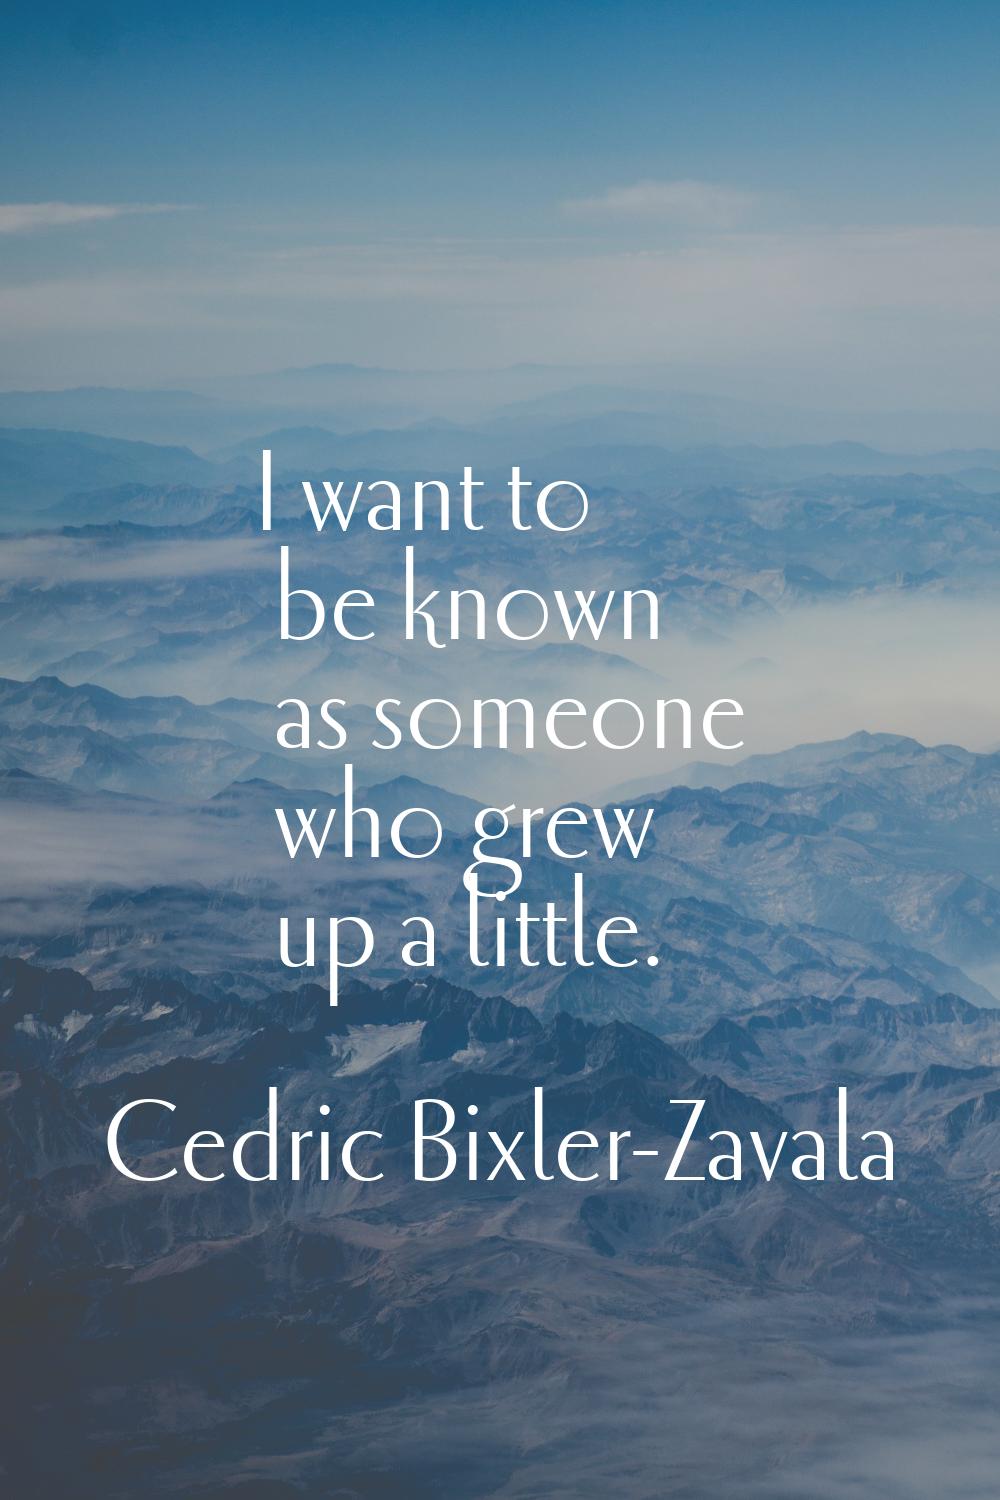 I want to be known as someone who grew up a little.